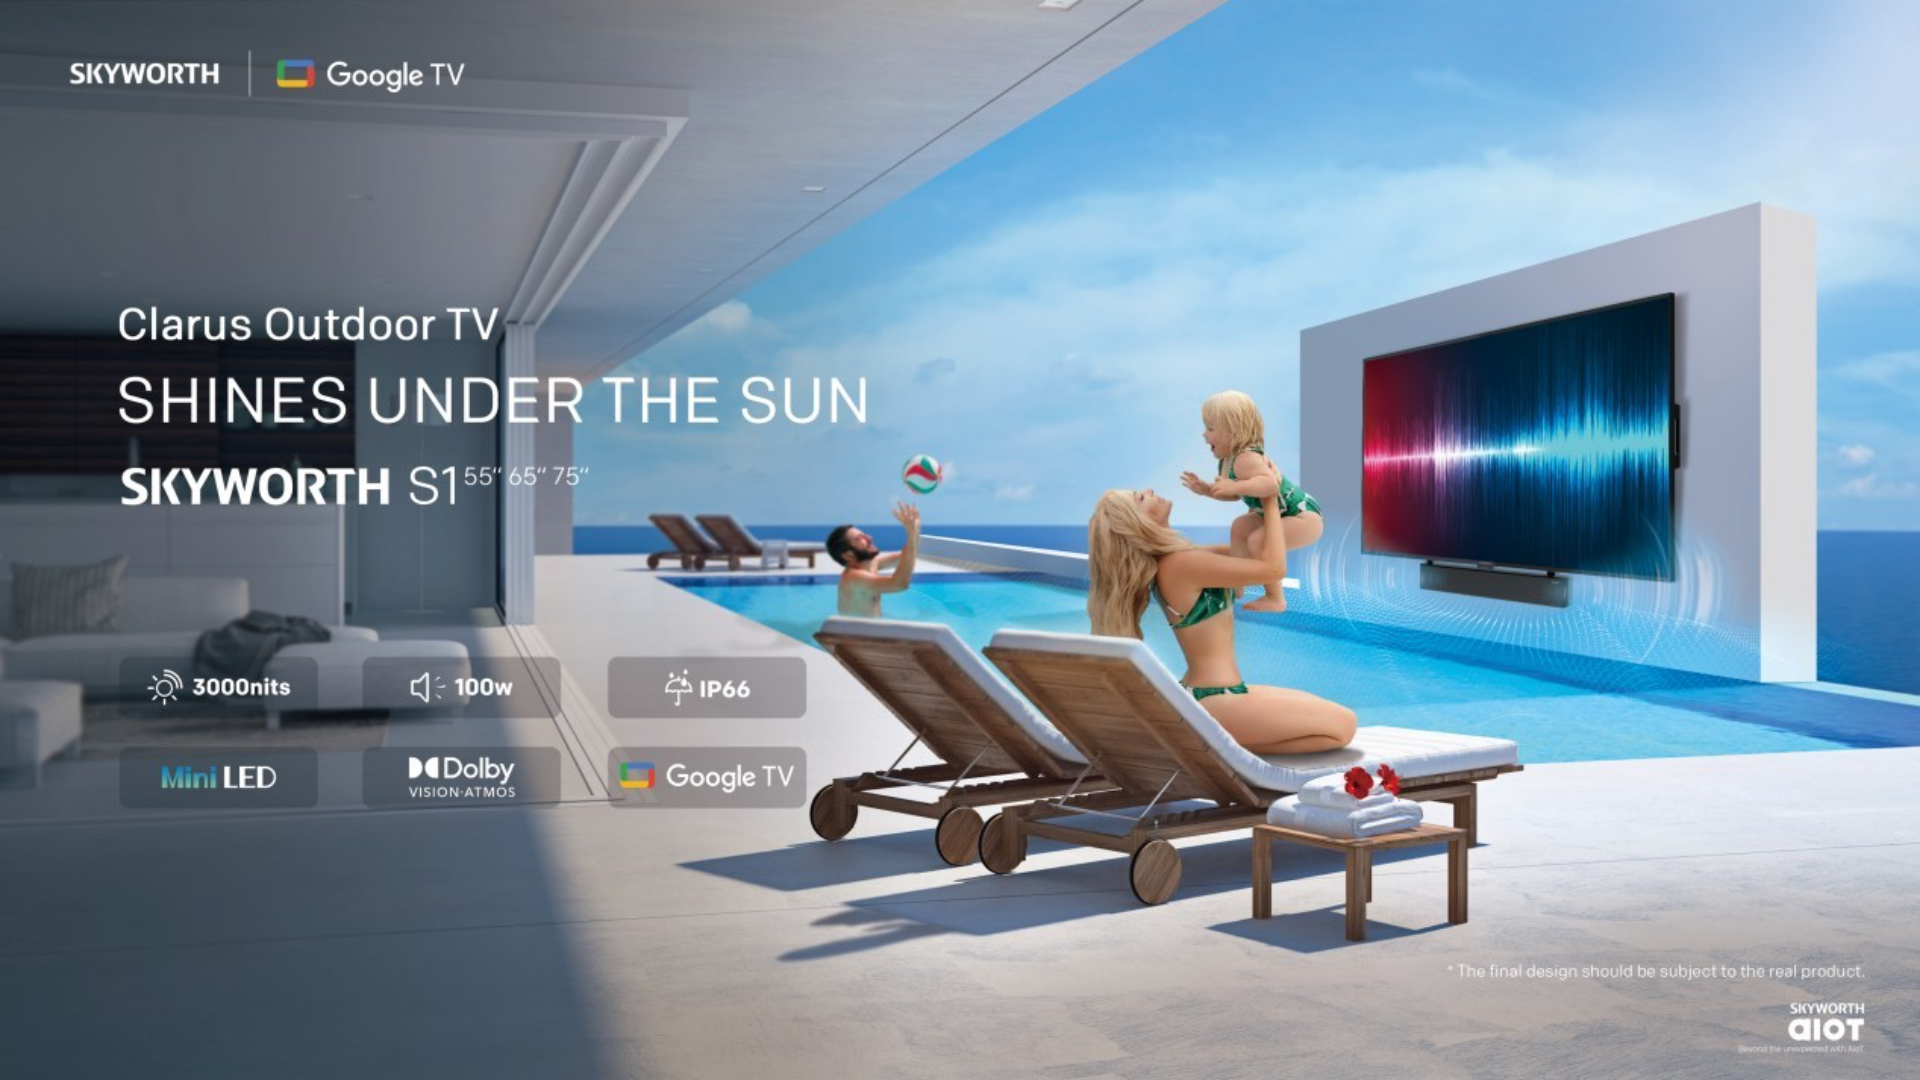 A new TV is here to challenge Samsung’s outdoor TV, The Terrace